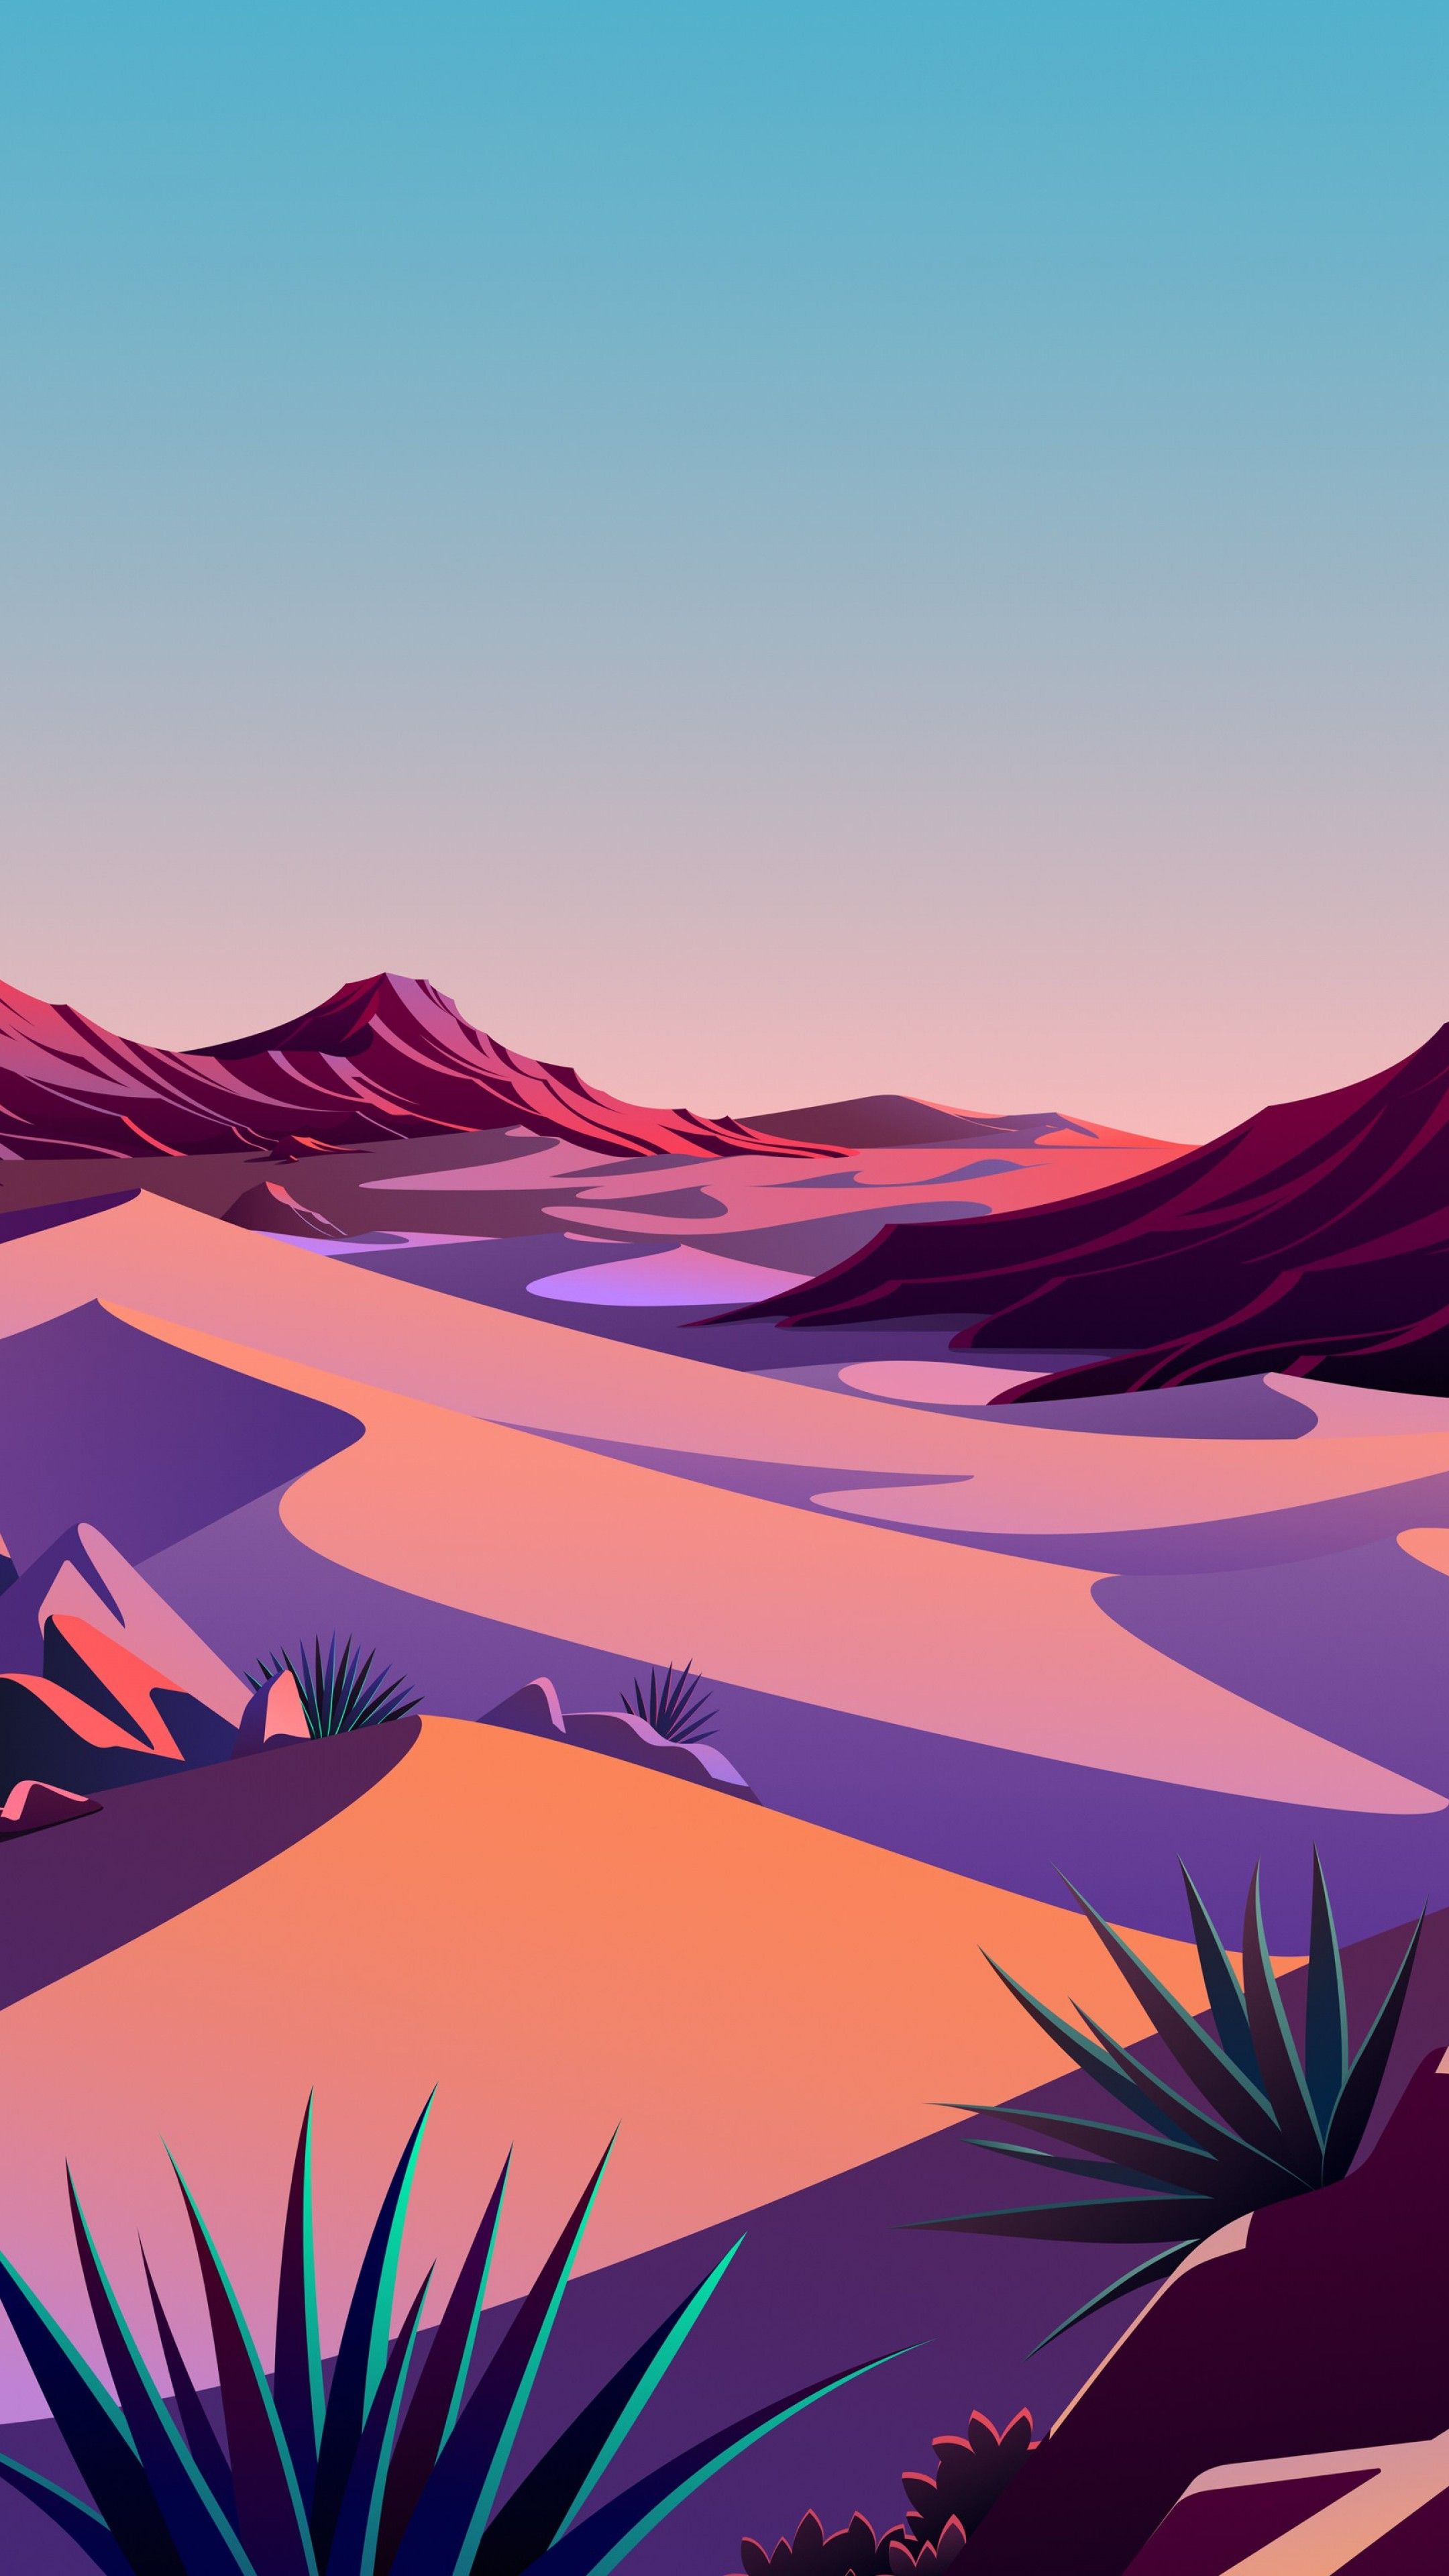 A desert landscape with mountains and cacti - Desert